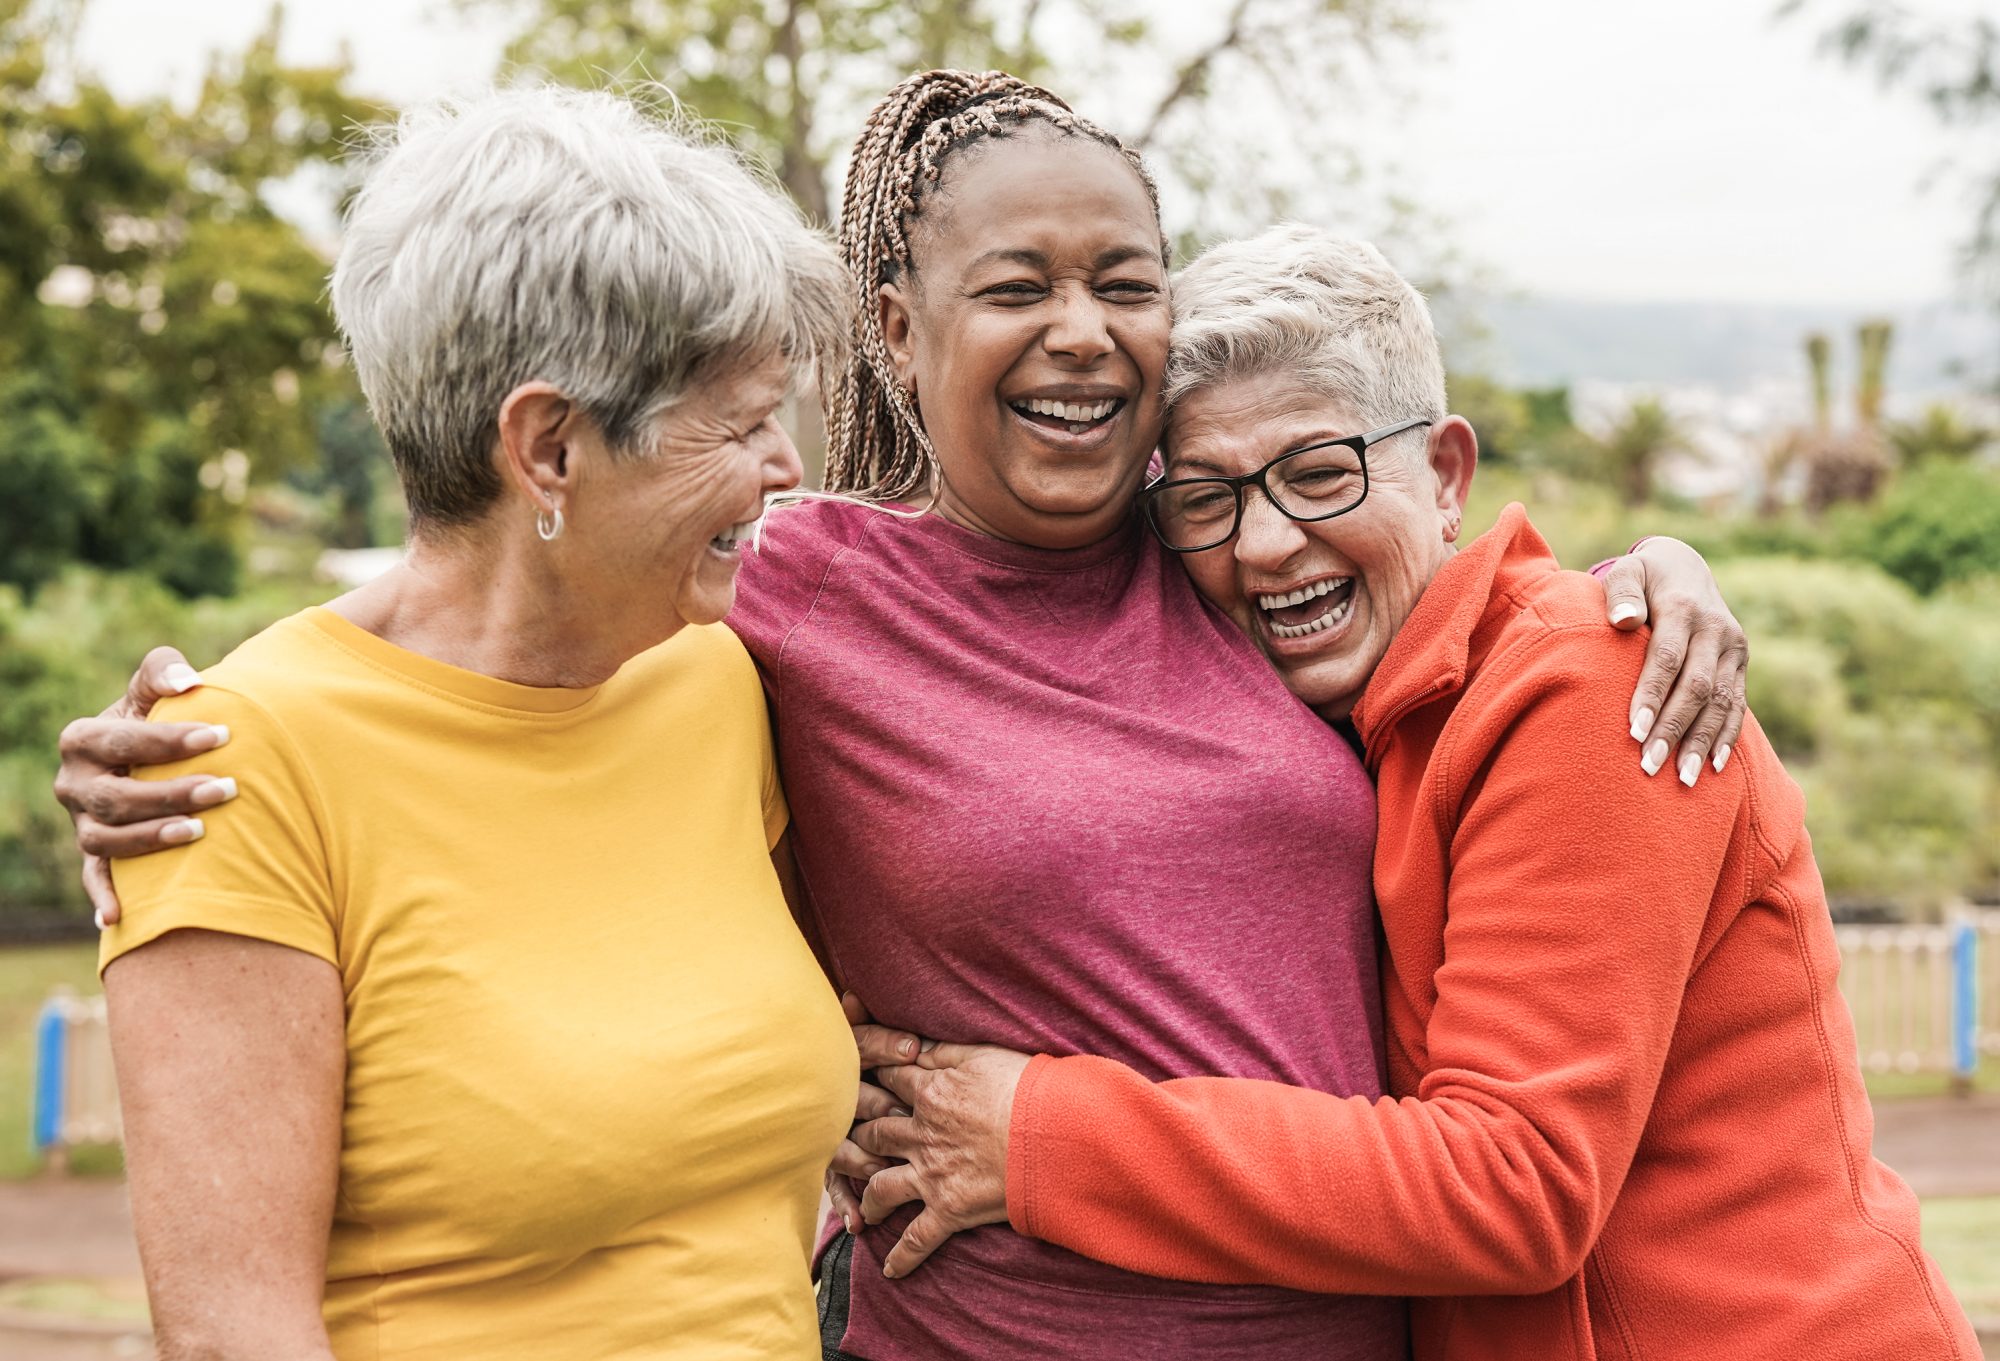 The importance of using an equity lens in age-friendly communities planning